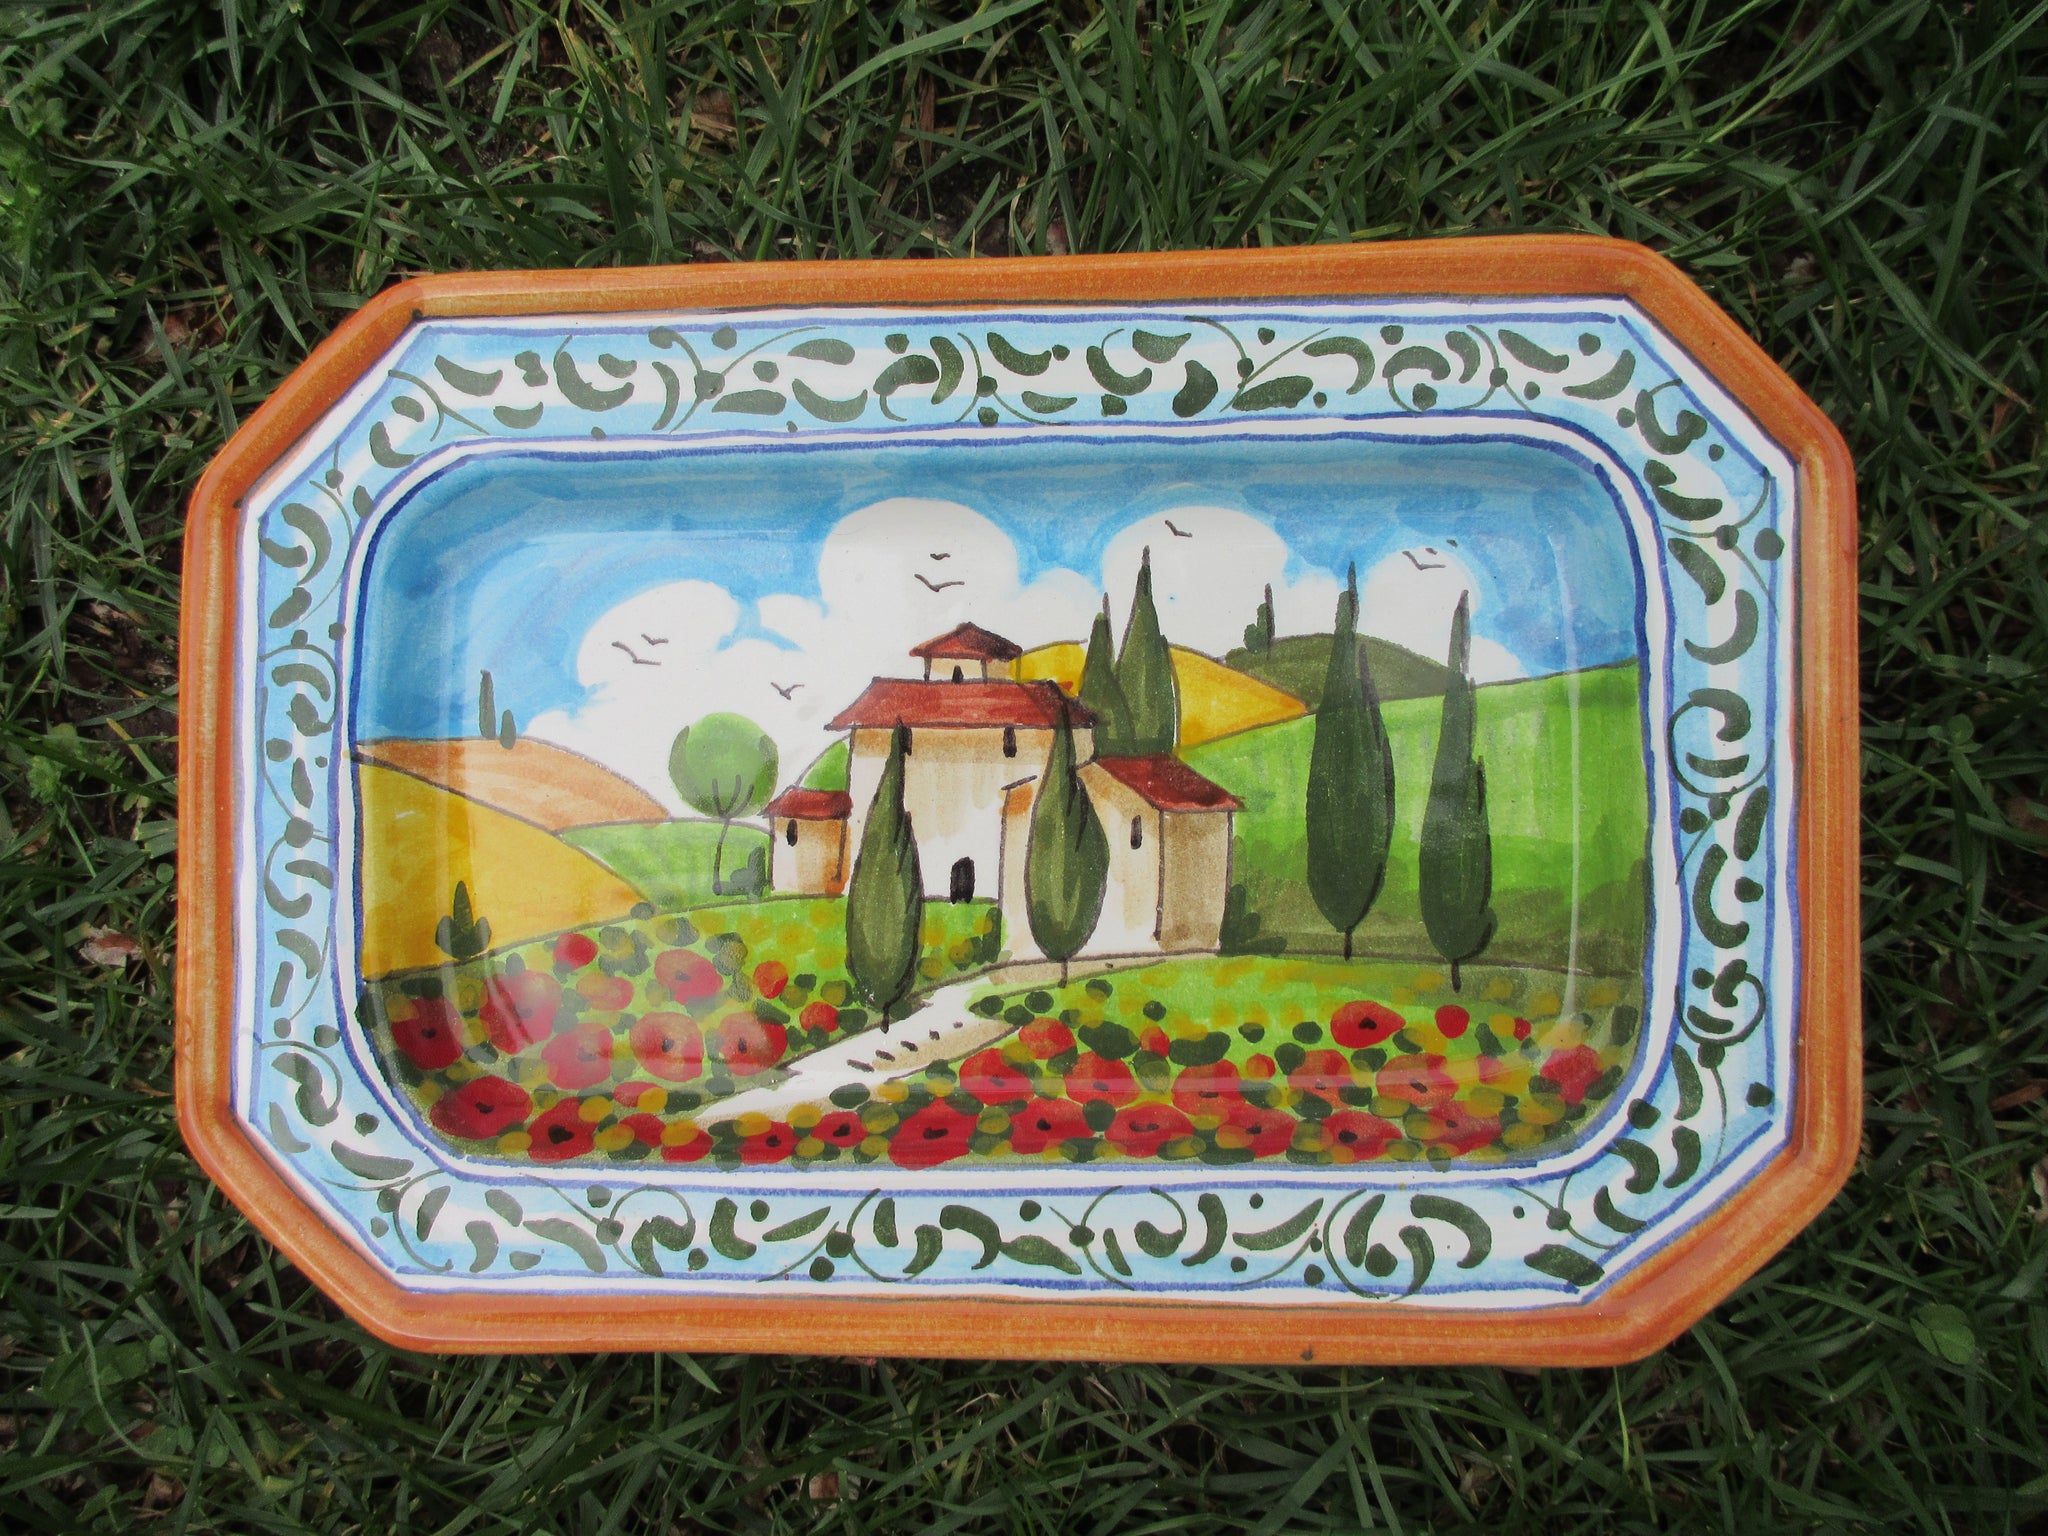 Tuscan octagonal dish handmade, hand-painted with poppies and fleur-de-lis design